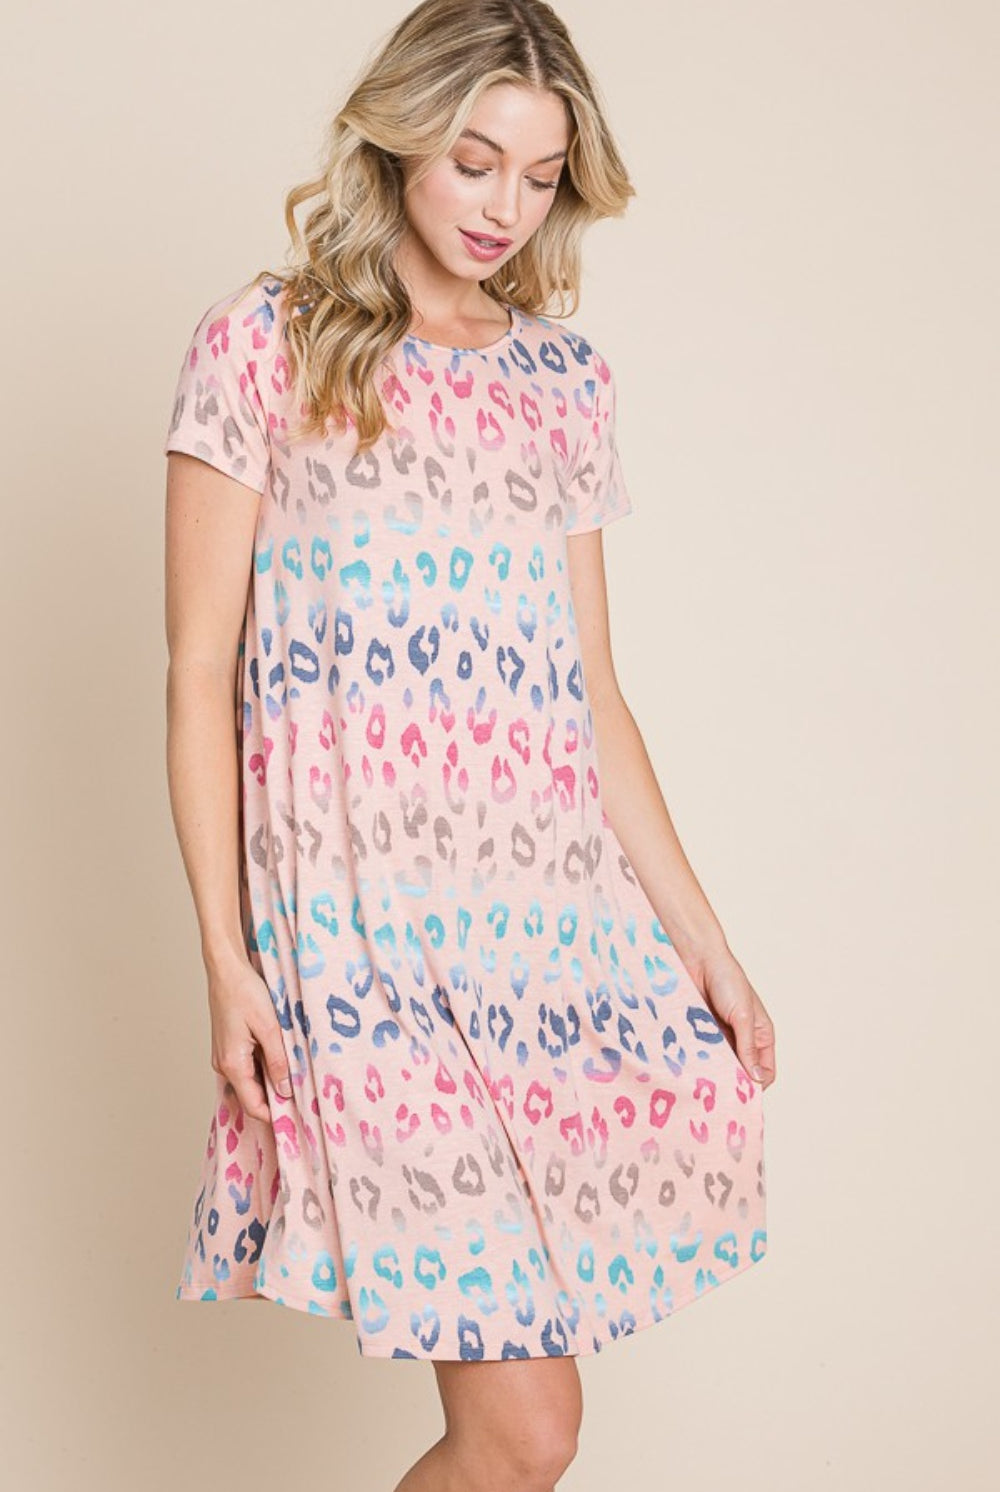 Happy woman wearing a Playful Pastel Leopard Print Short Sleeve Dress, embodying a cheerful and stylish vibe, perfect for spring and summer days.